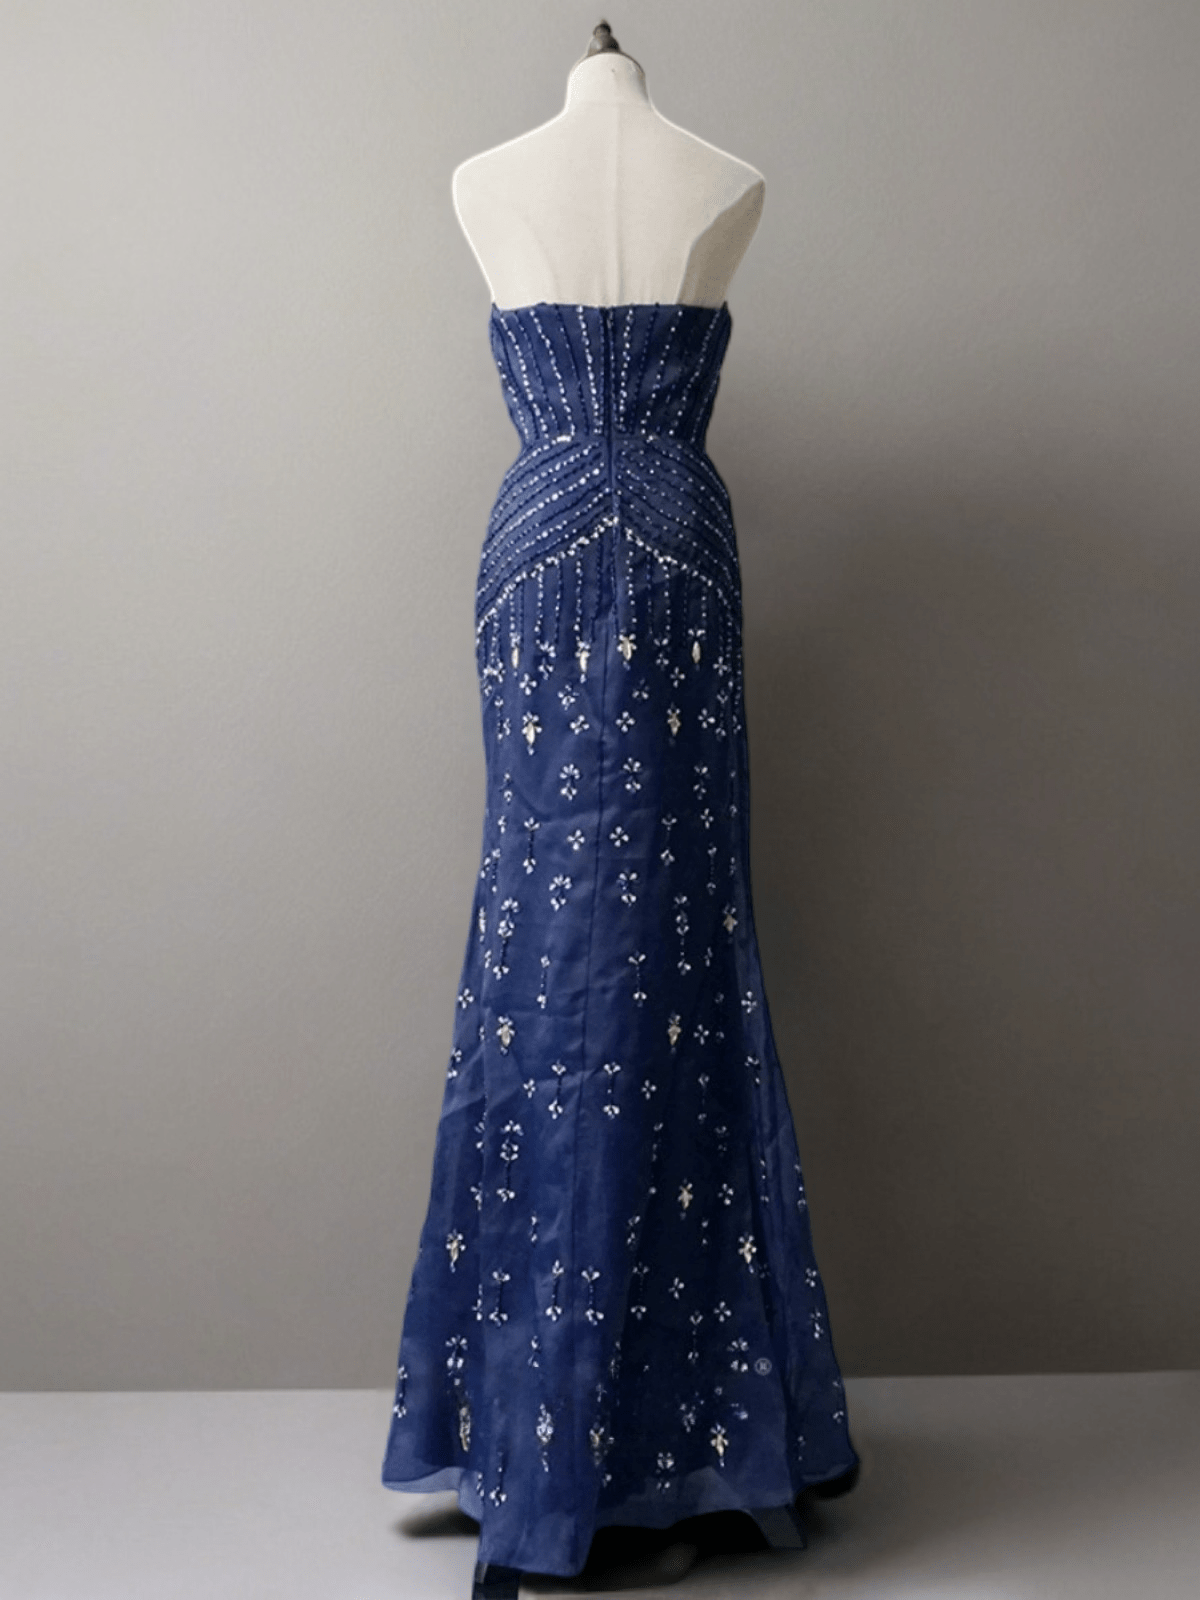 Gothic Navy Blue Strapless Sequin Evening Gown - Pretty Blue Beaded Dress with Convertible Train Plus Size - WonderlandByLilian